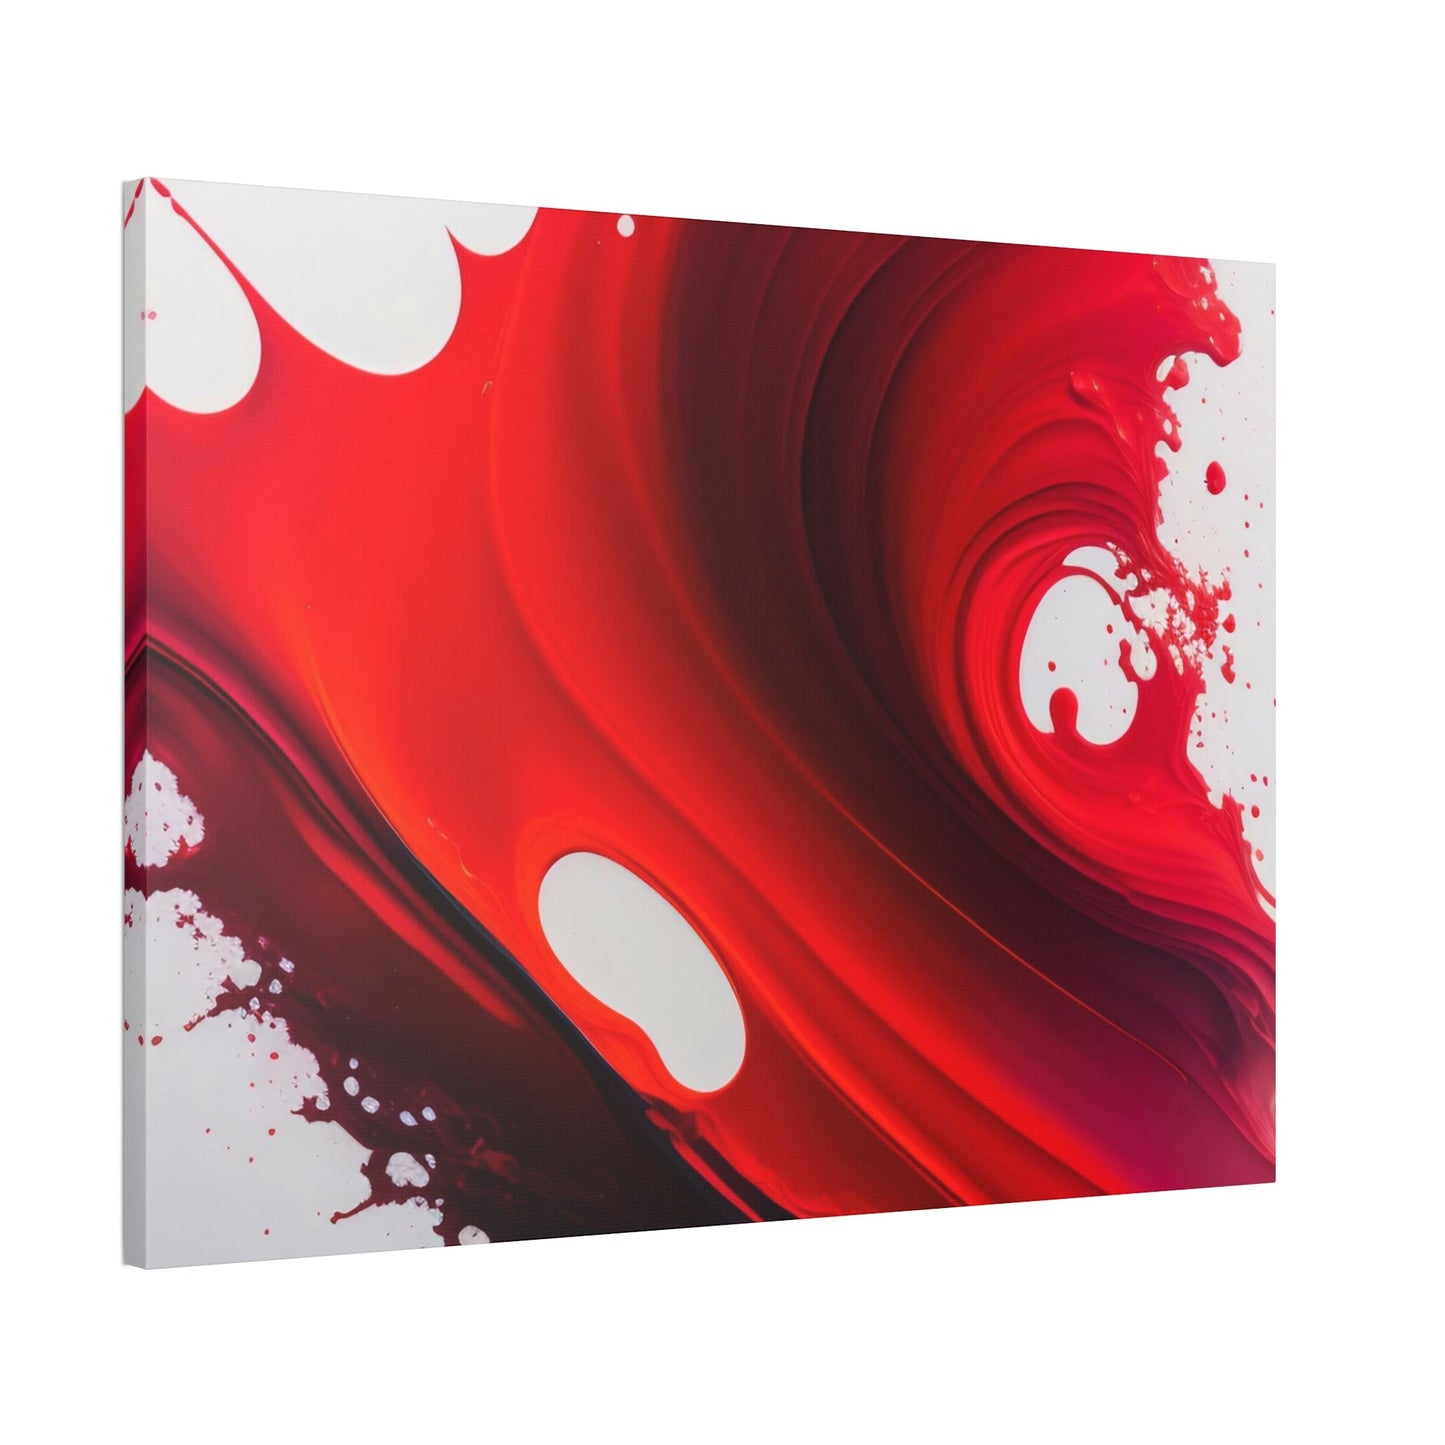 The Art of Energy: Red Abstract Wall Art and Framed Posters & Canvas